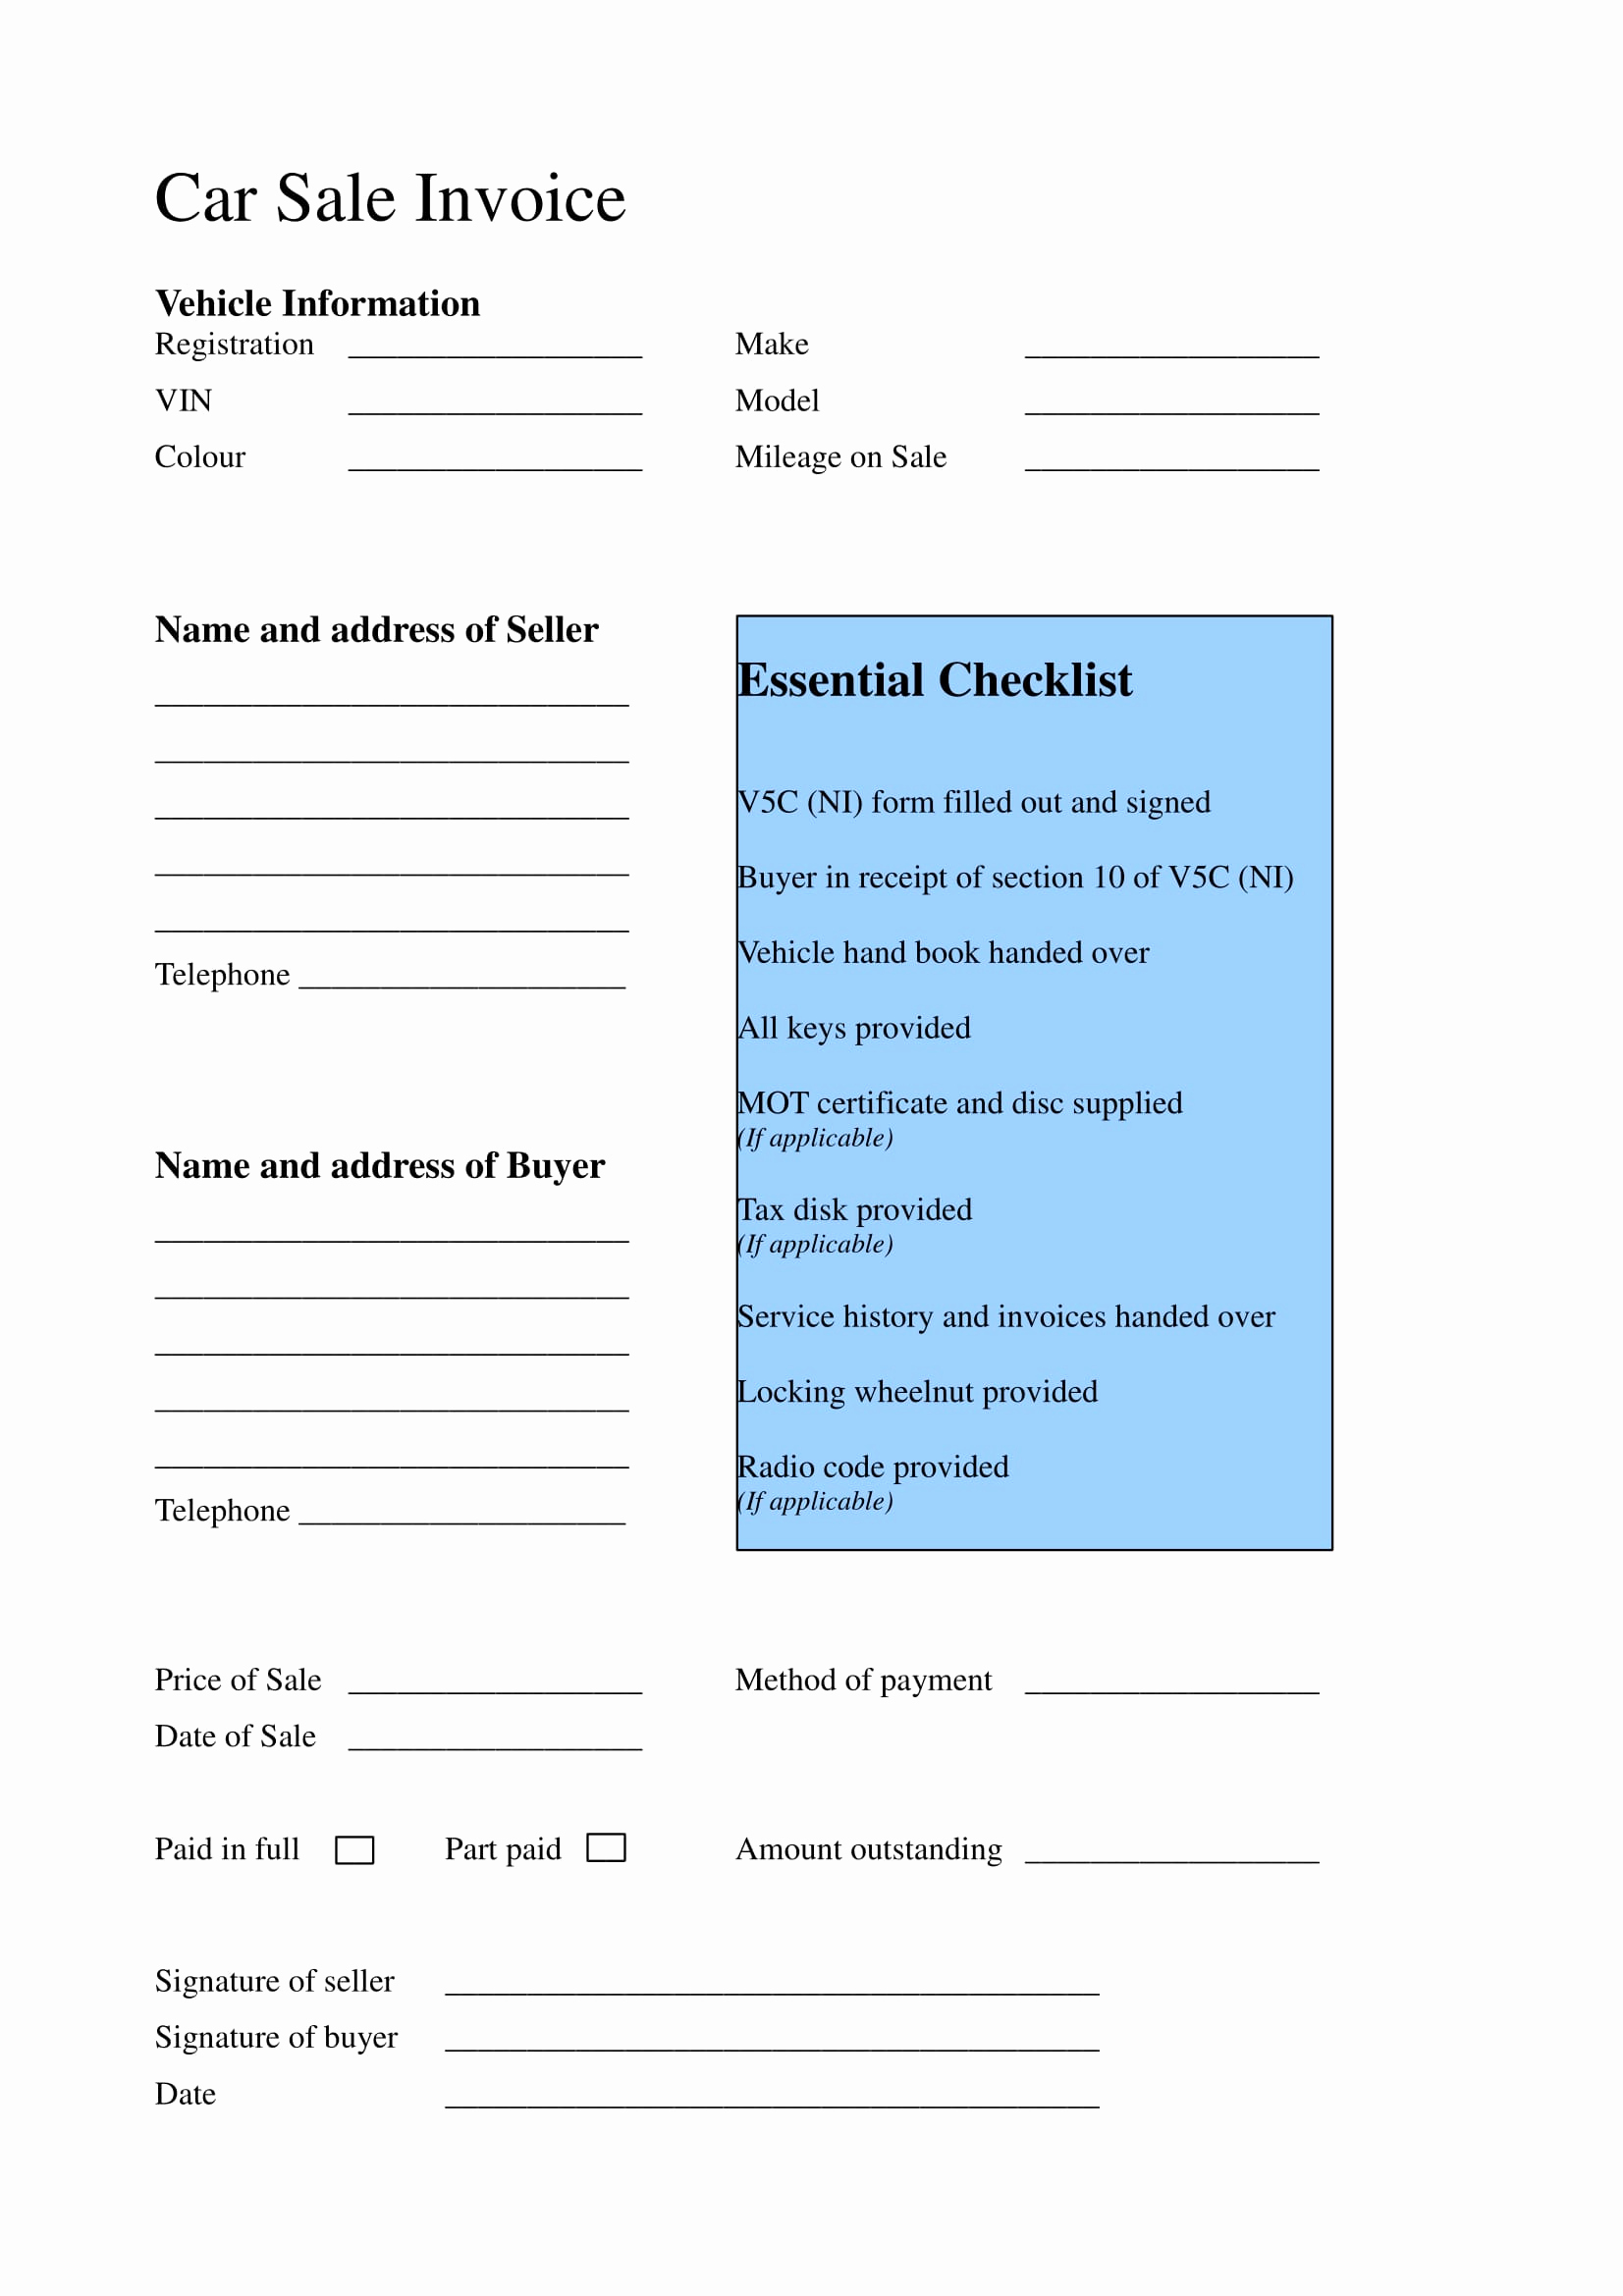 Car Sales Invoice Template Lovely Free 15 Business forms for Car Dealers In Pdf